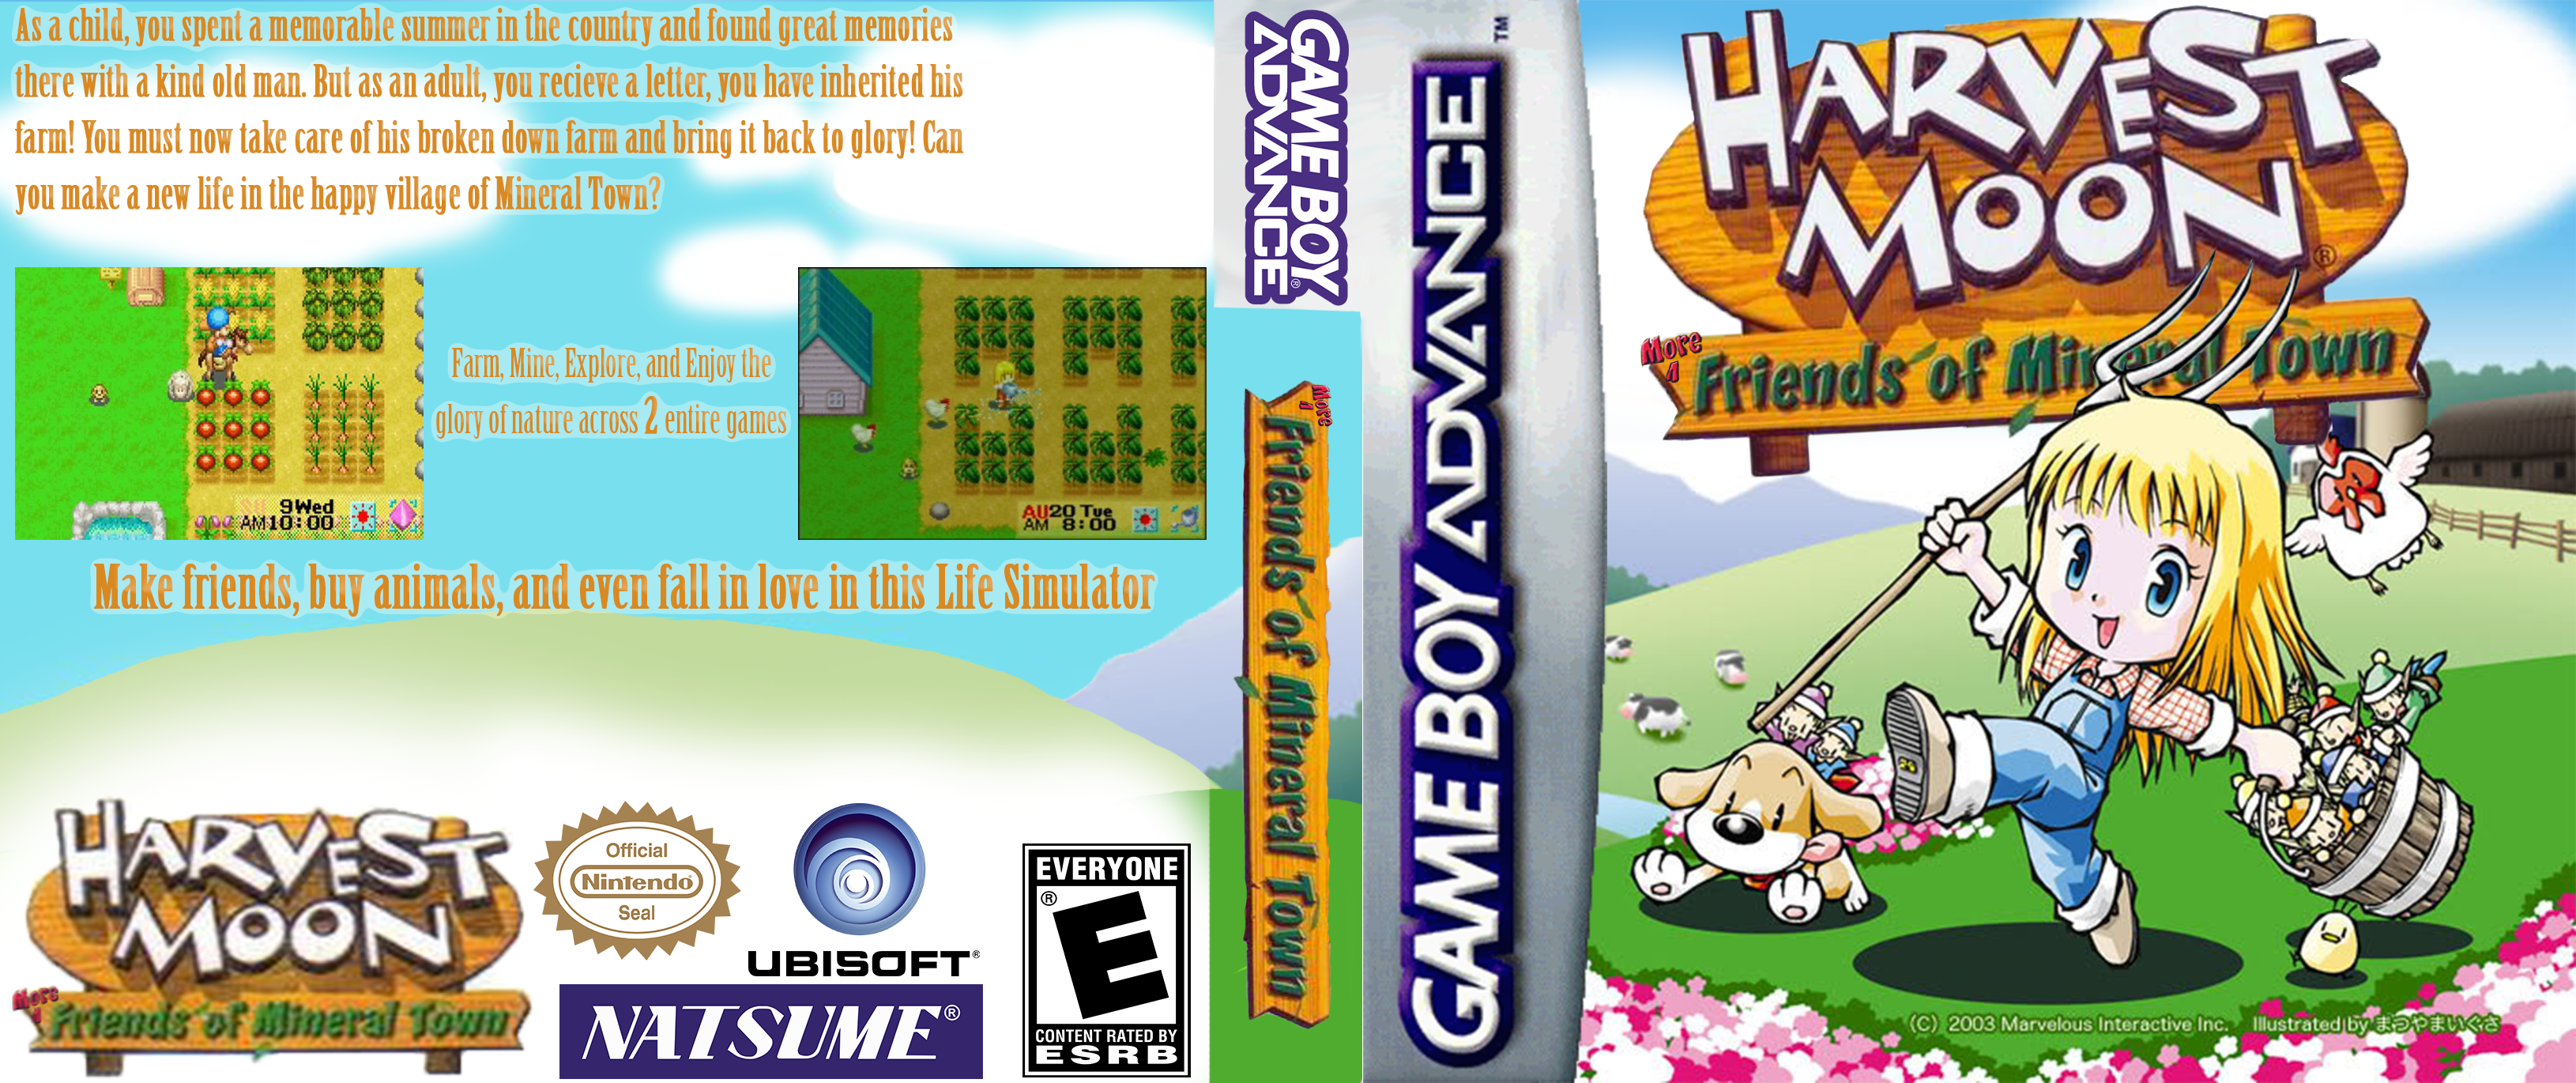 Harvest Moon Friends of Mineral Town box cover